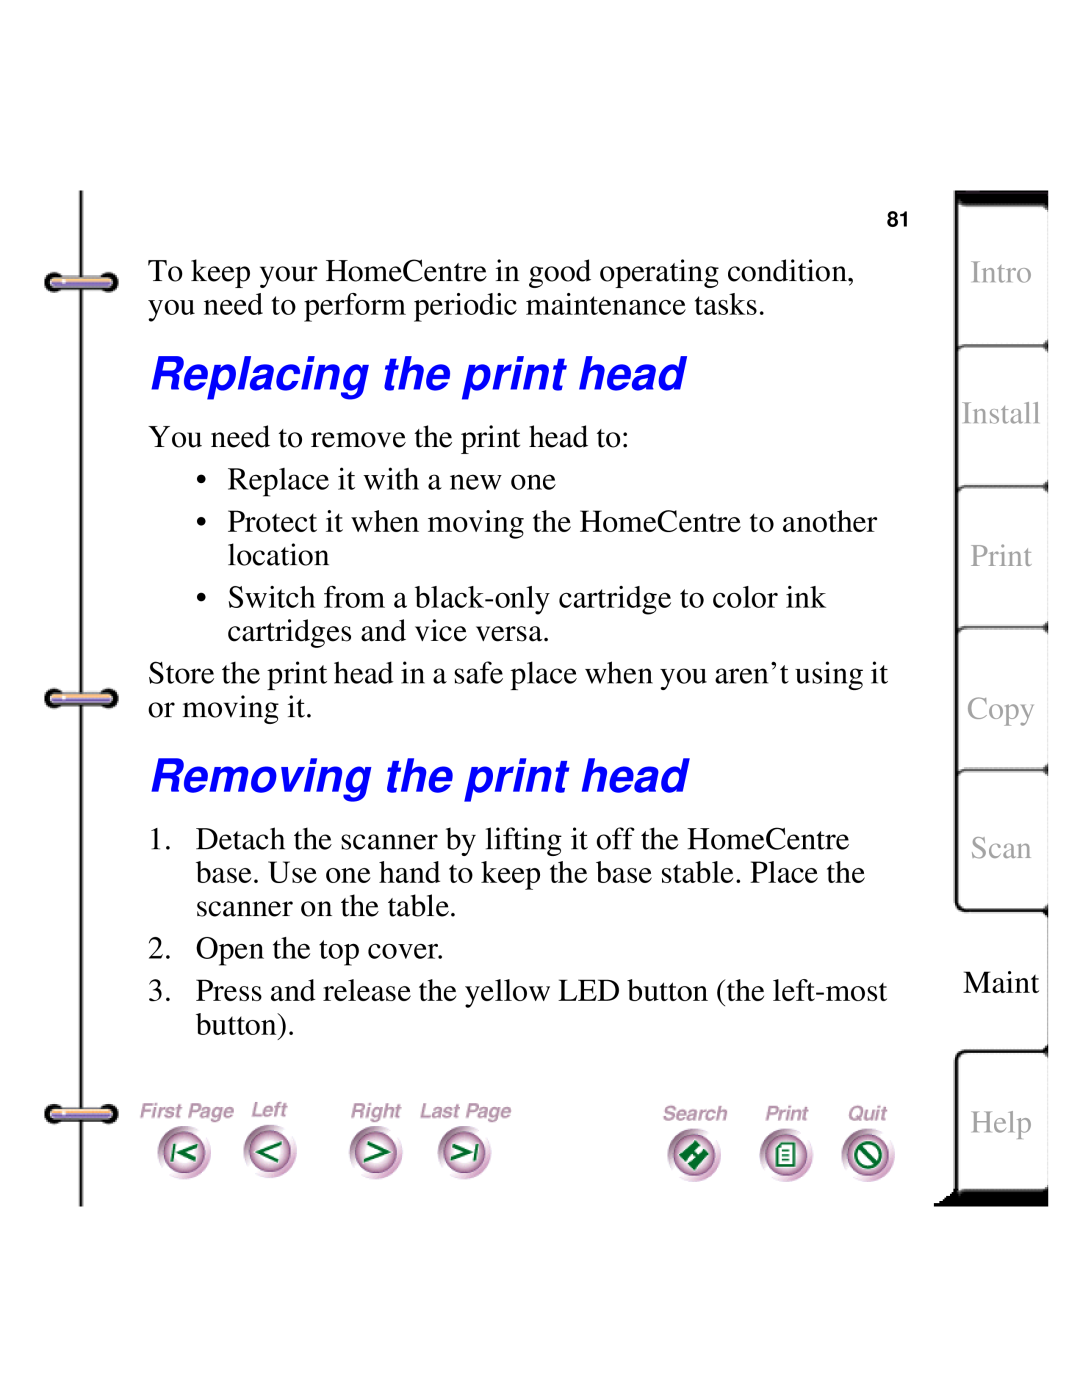 Xerox Document HomeCentre manual Replacing the print head, Removing the print head, Intro Install Print Copy Scan, Help 